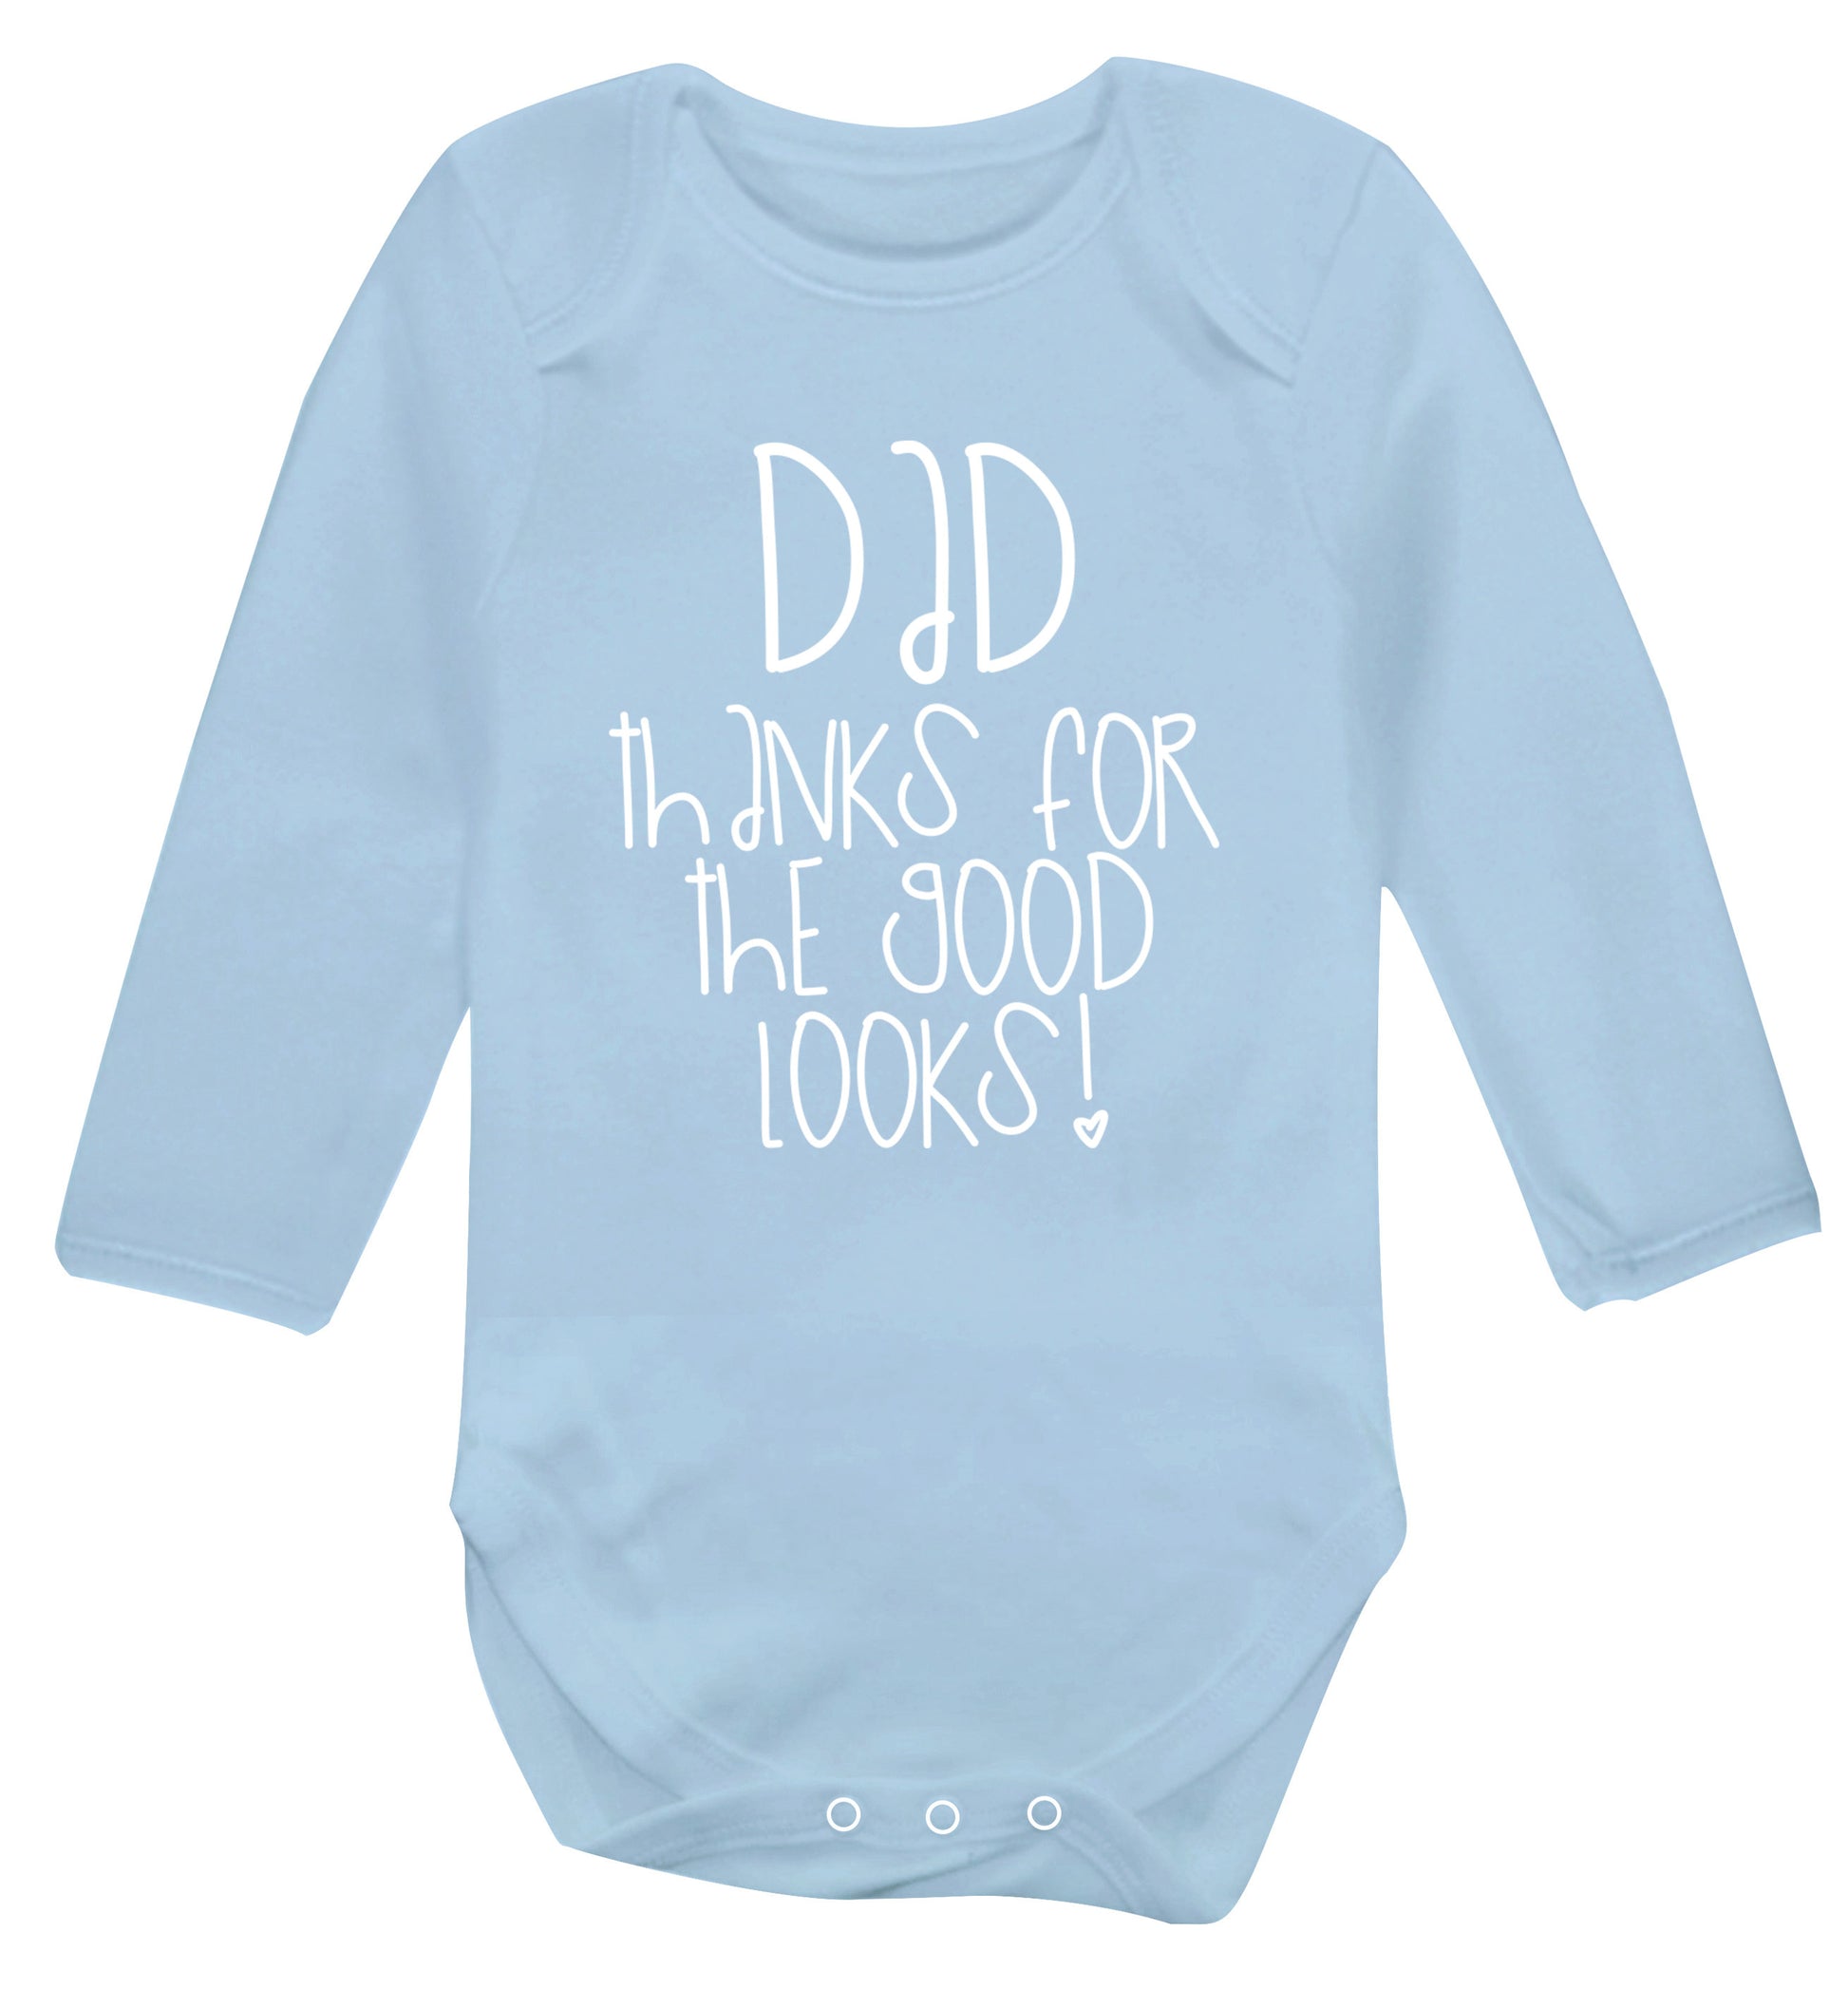 Dad thanks for the good looks Baby Vest long sleeved pale blue 6-12 months